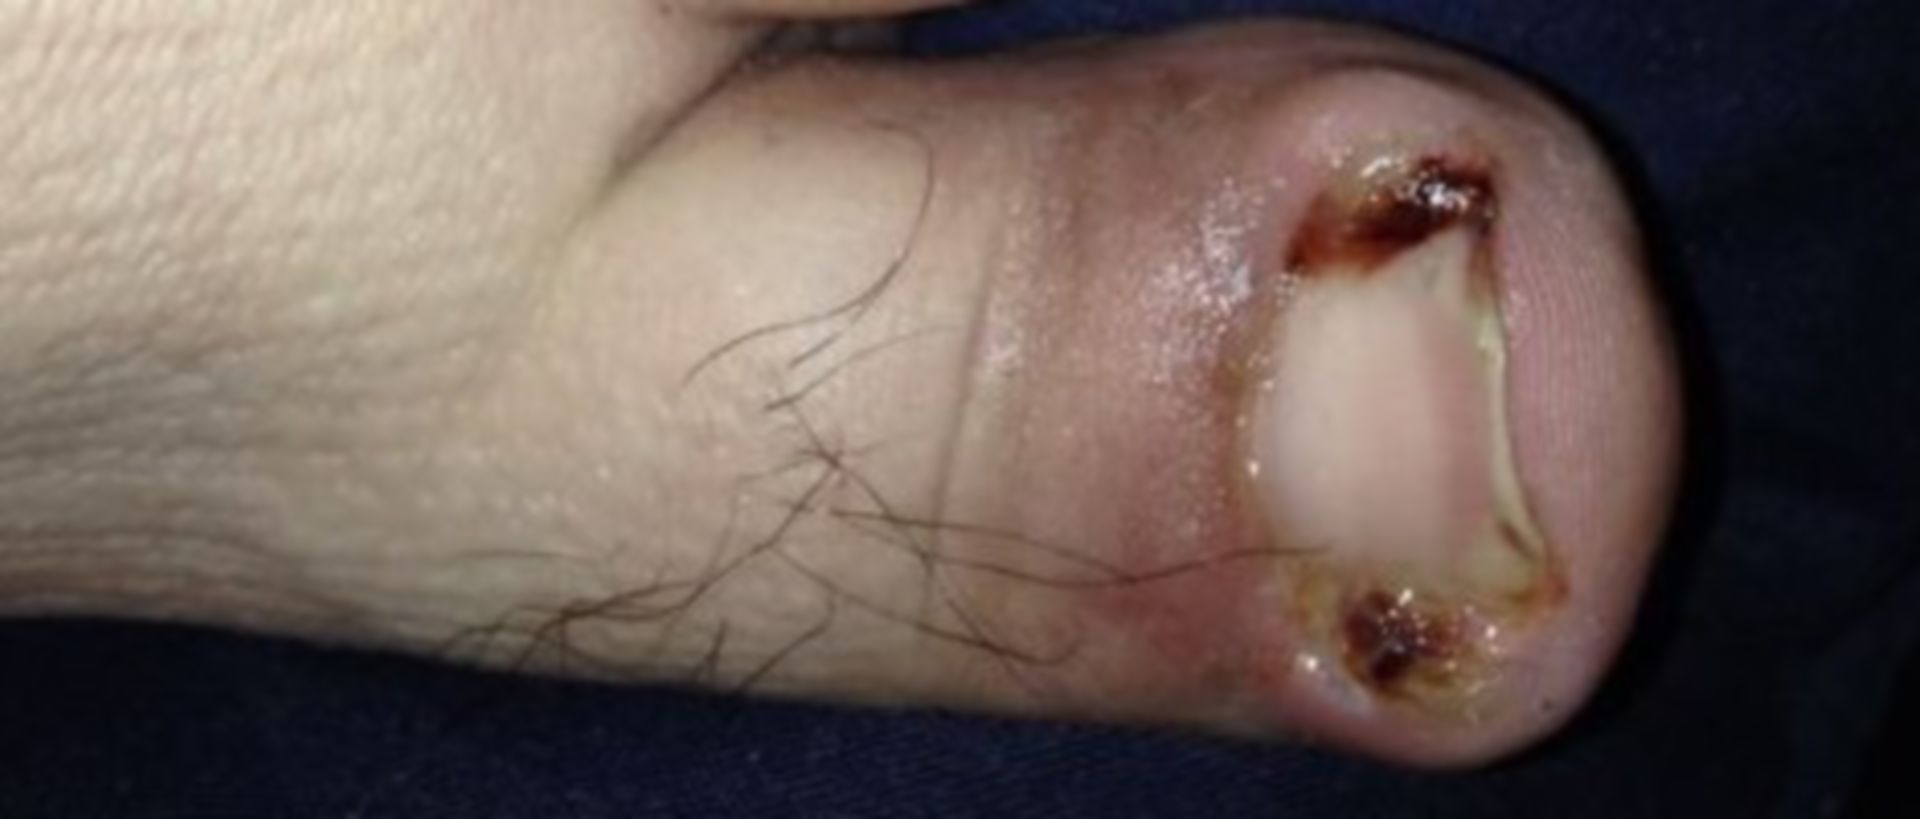 Infection of a toe with ingrown toenail